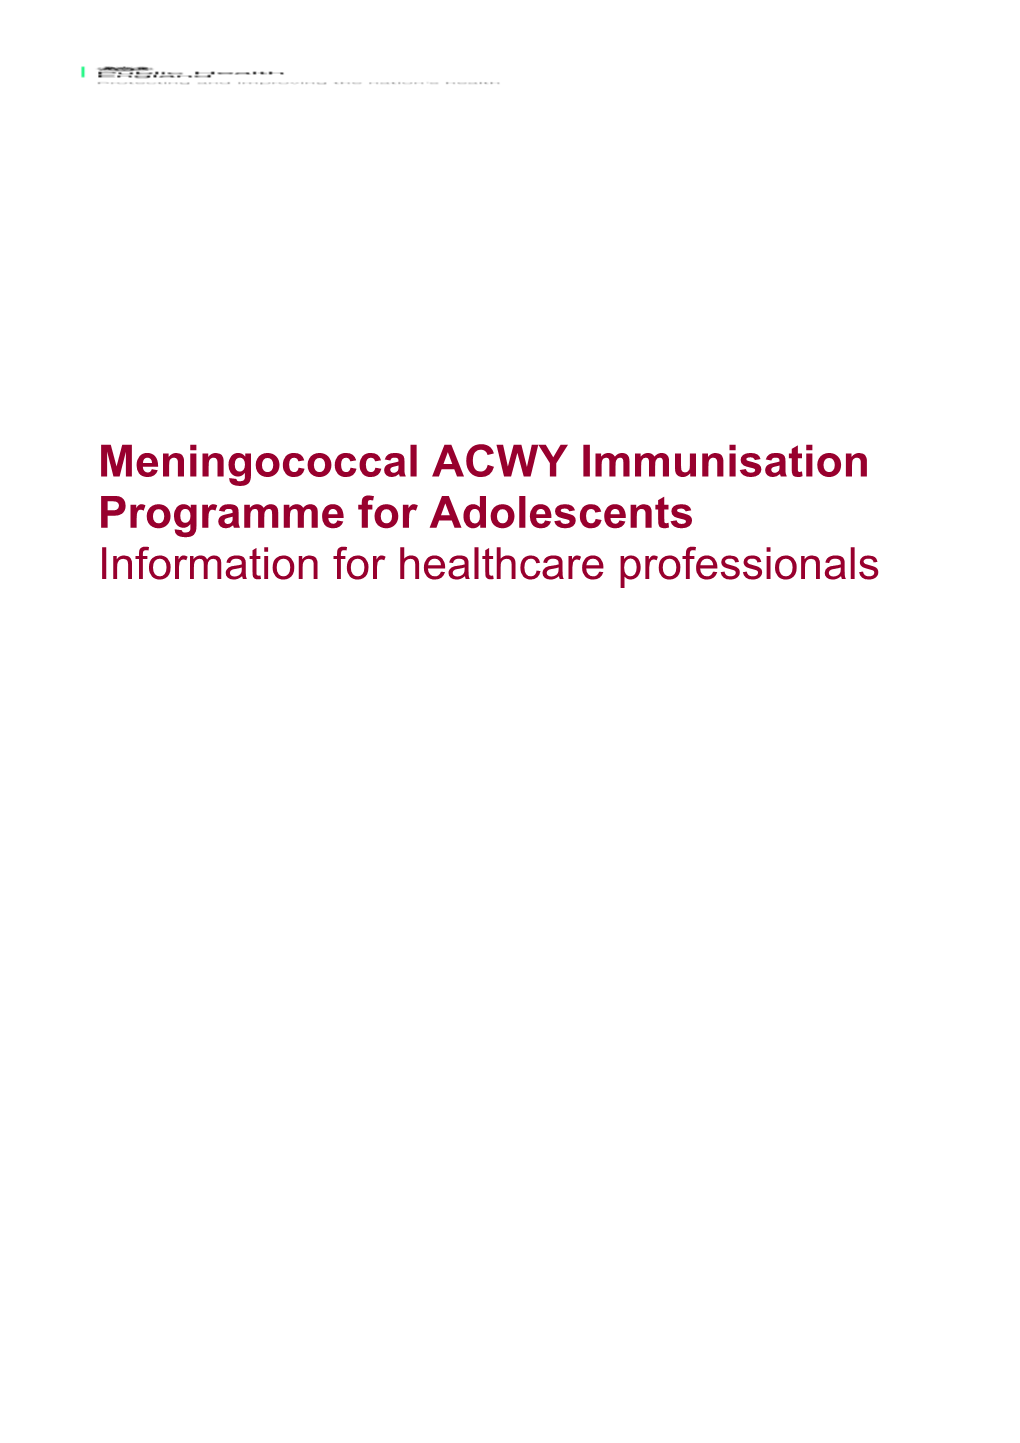 Meningococcal ACWY Immunisation Programme for Adolescents: Information for Healthcare